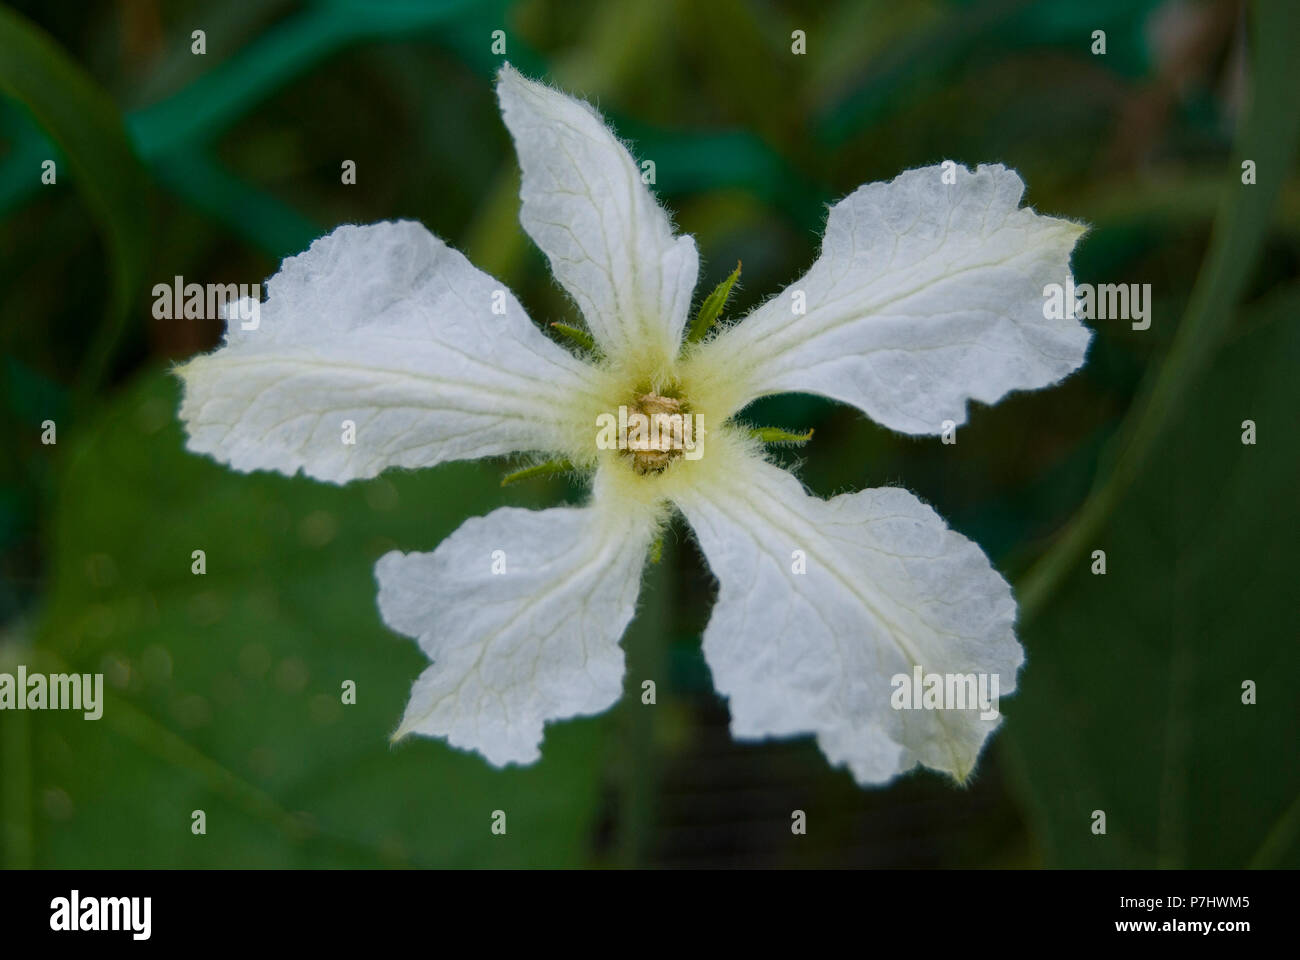 A white delicate flower of vegetable lagenaria blooms in the garden. Stock Photo